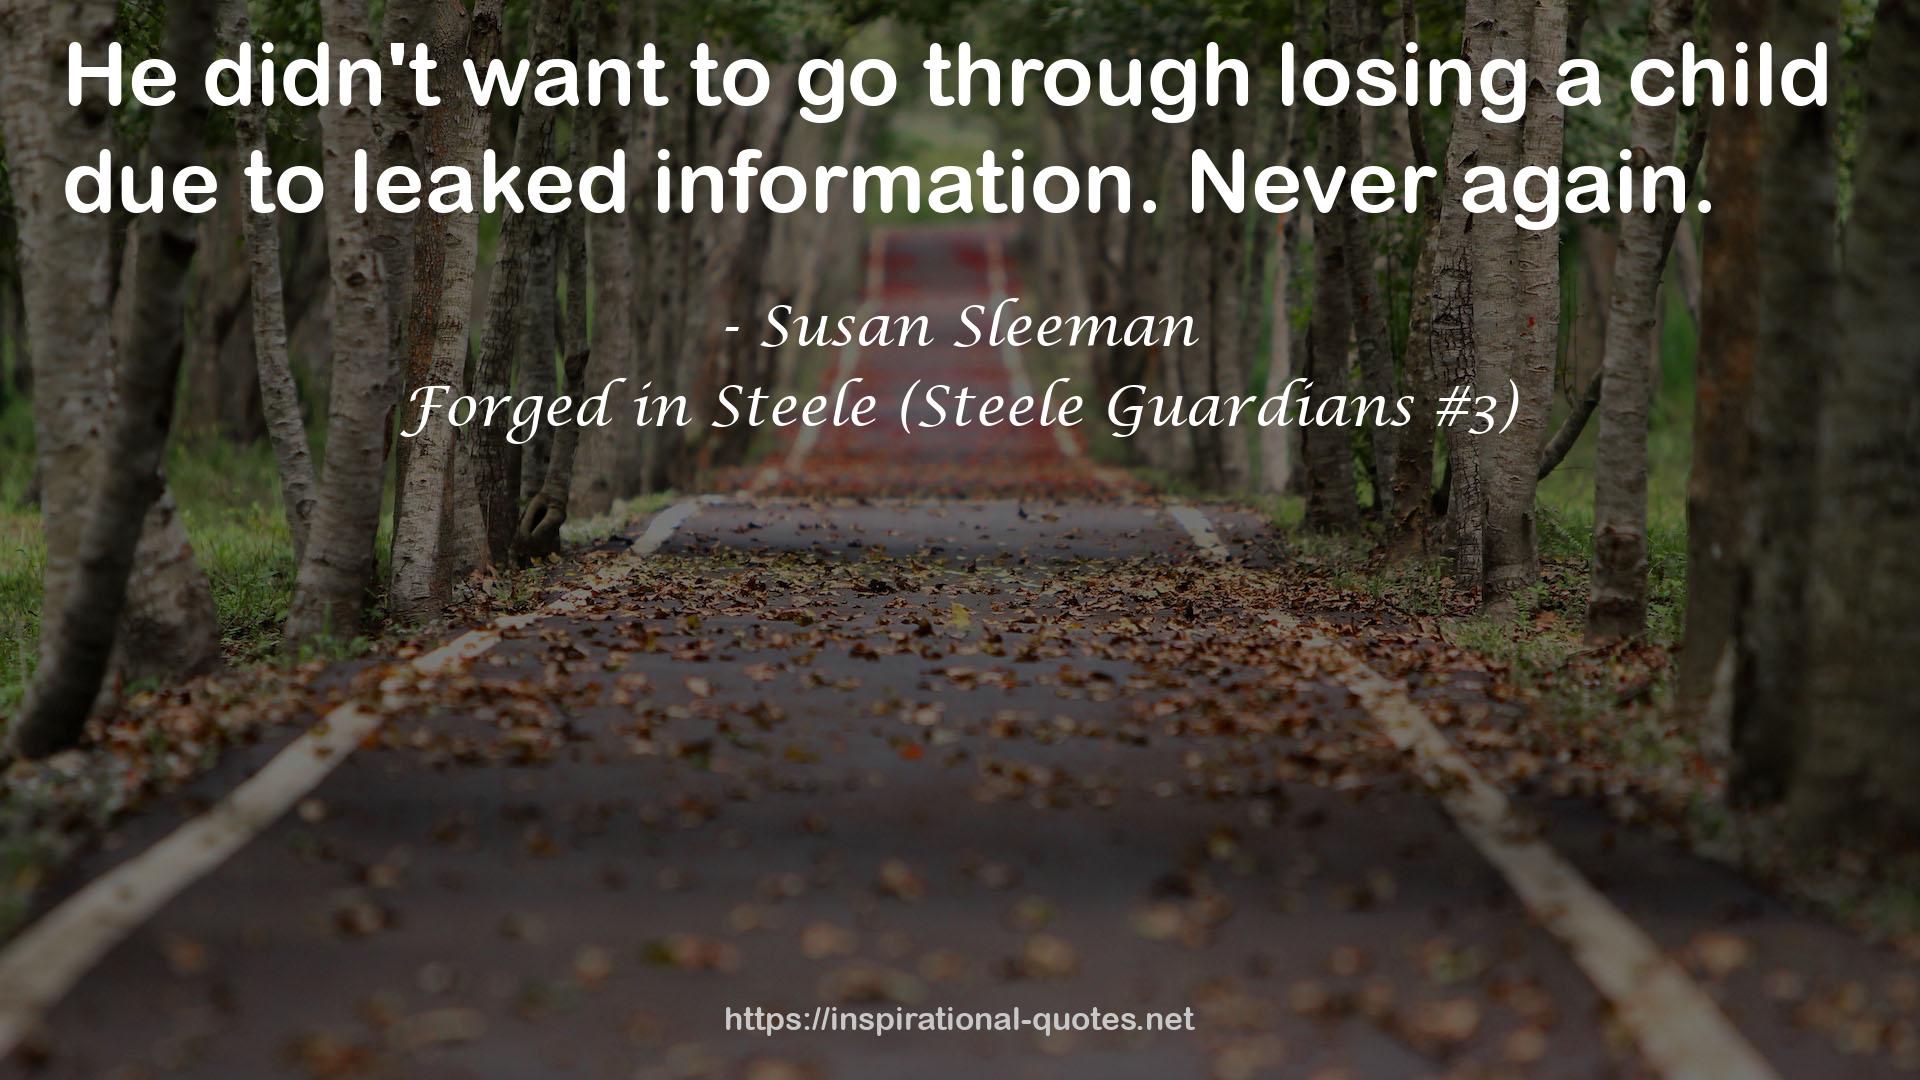 Forged in Steele (Steele Guardians #3) QUOTES